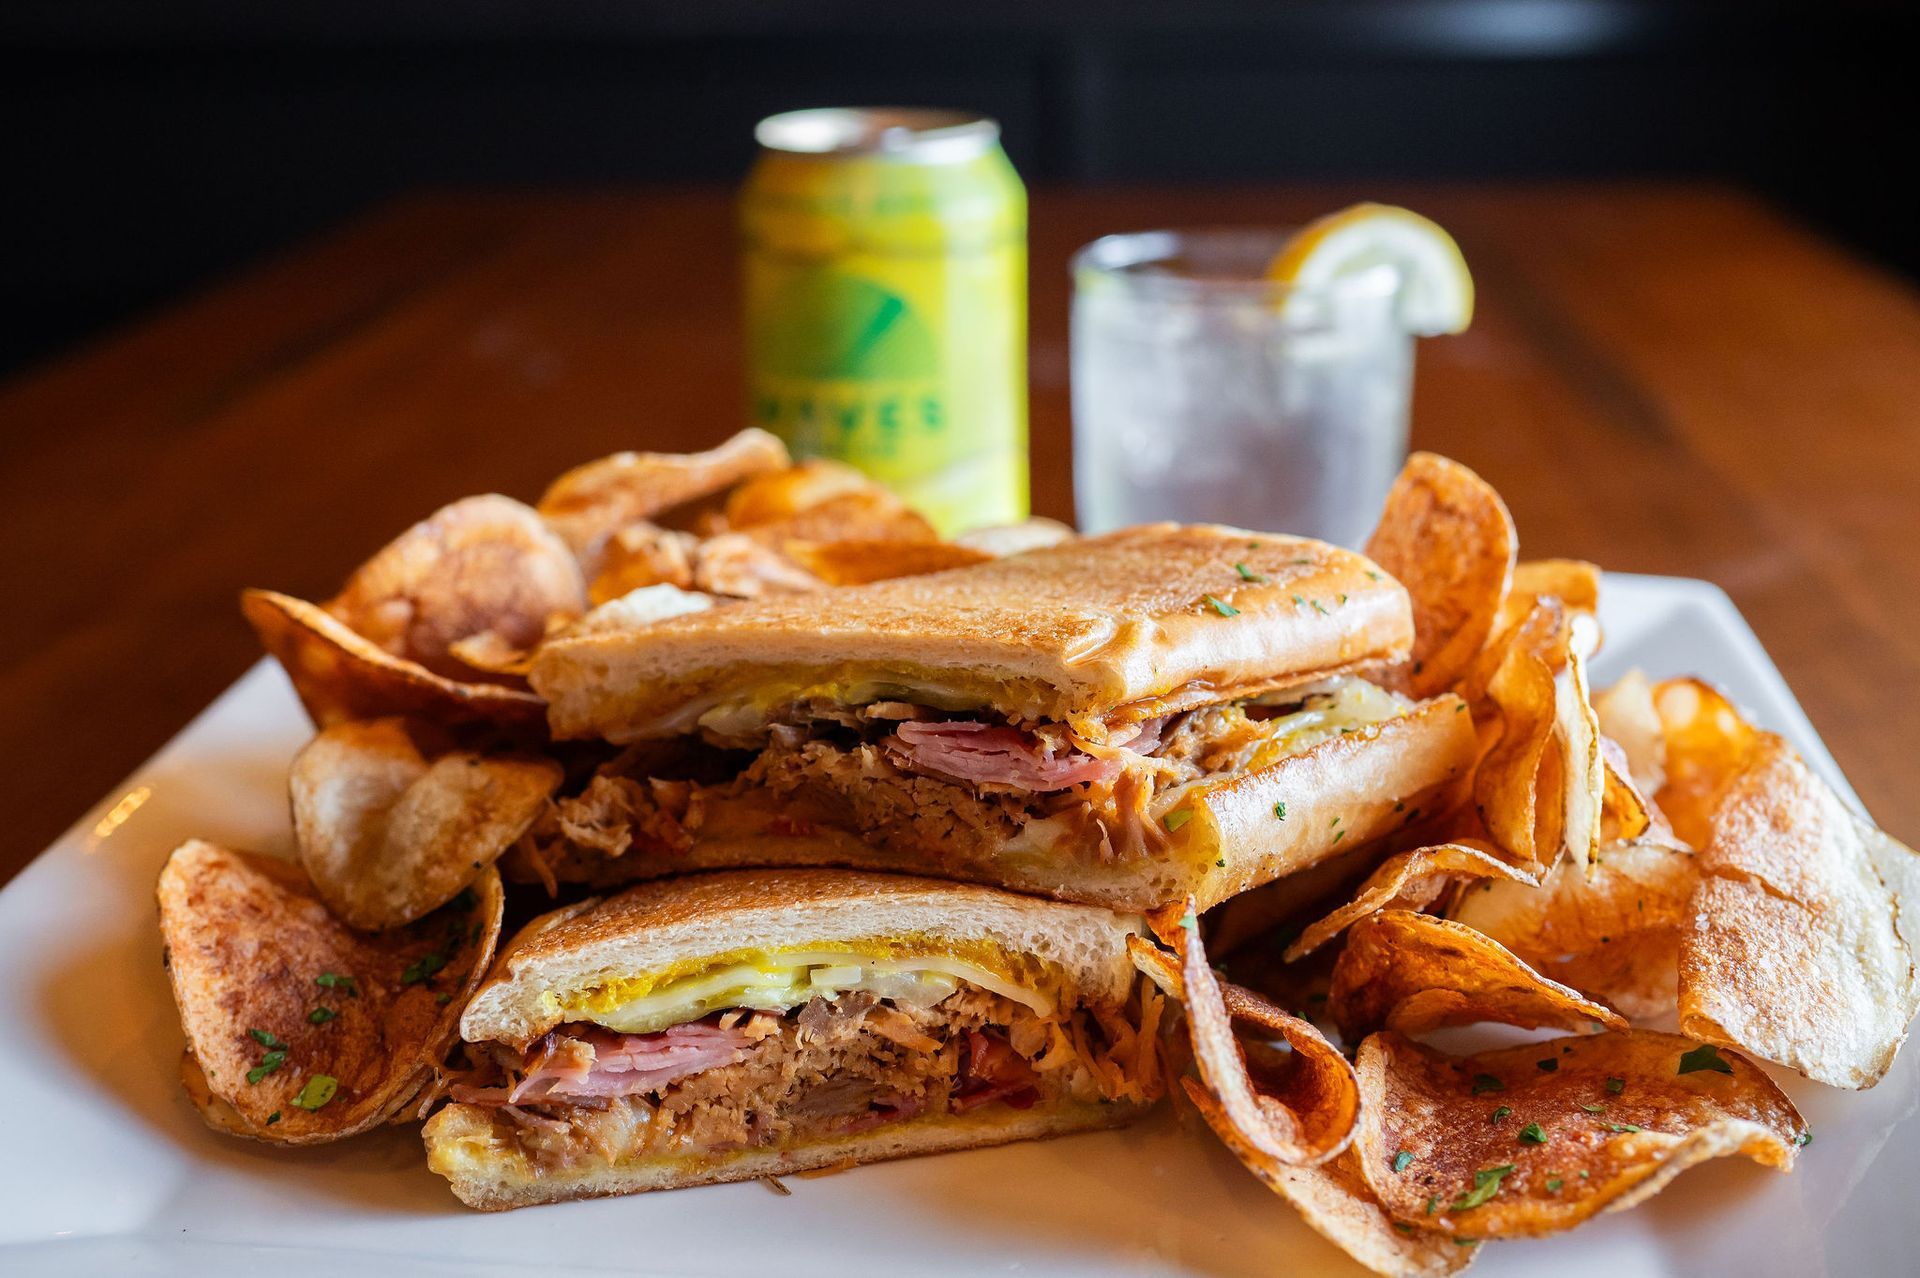 Try Tasty Sandwiches & Drinks From The Penguin in Columbia, MO